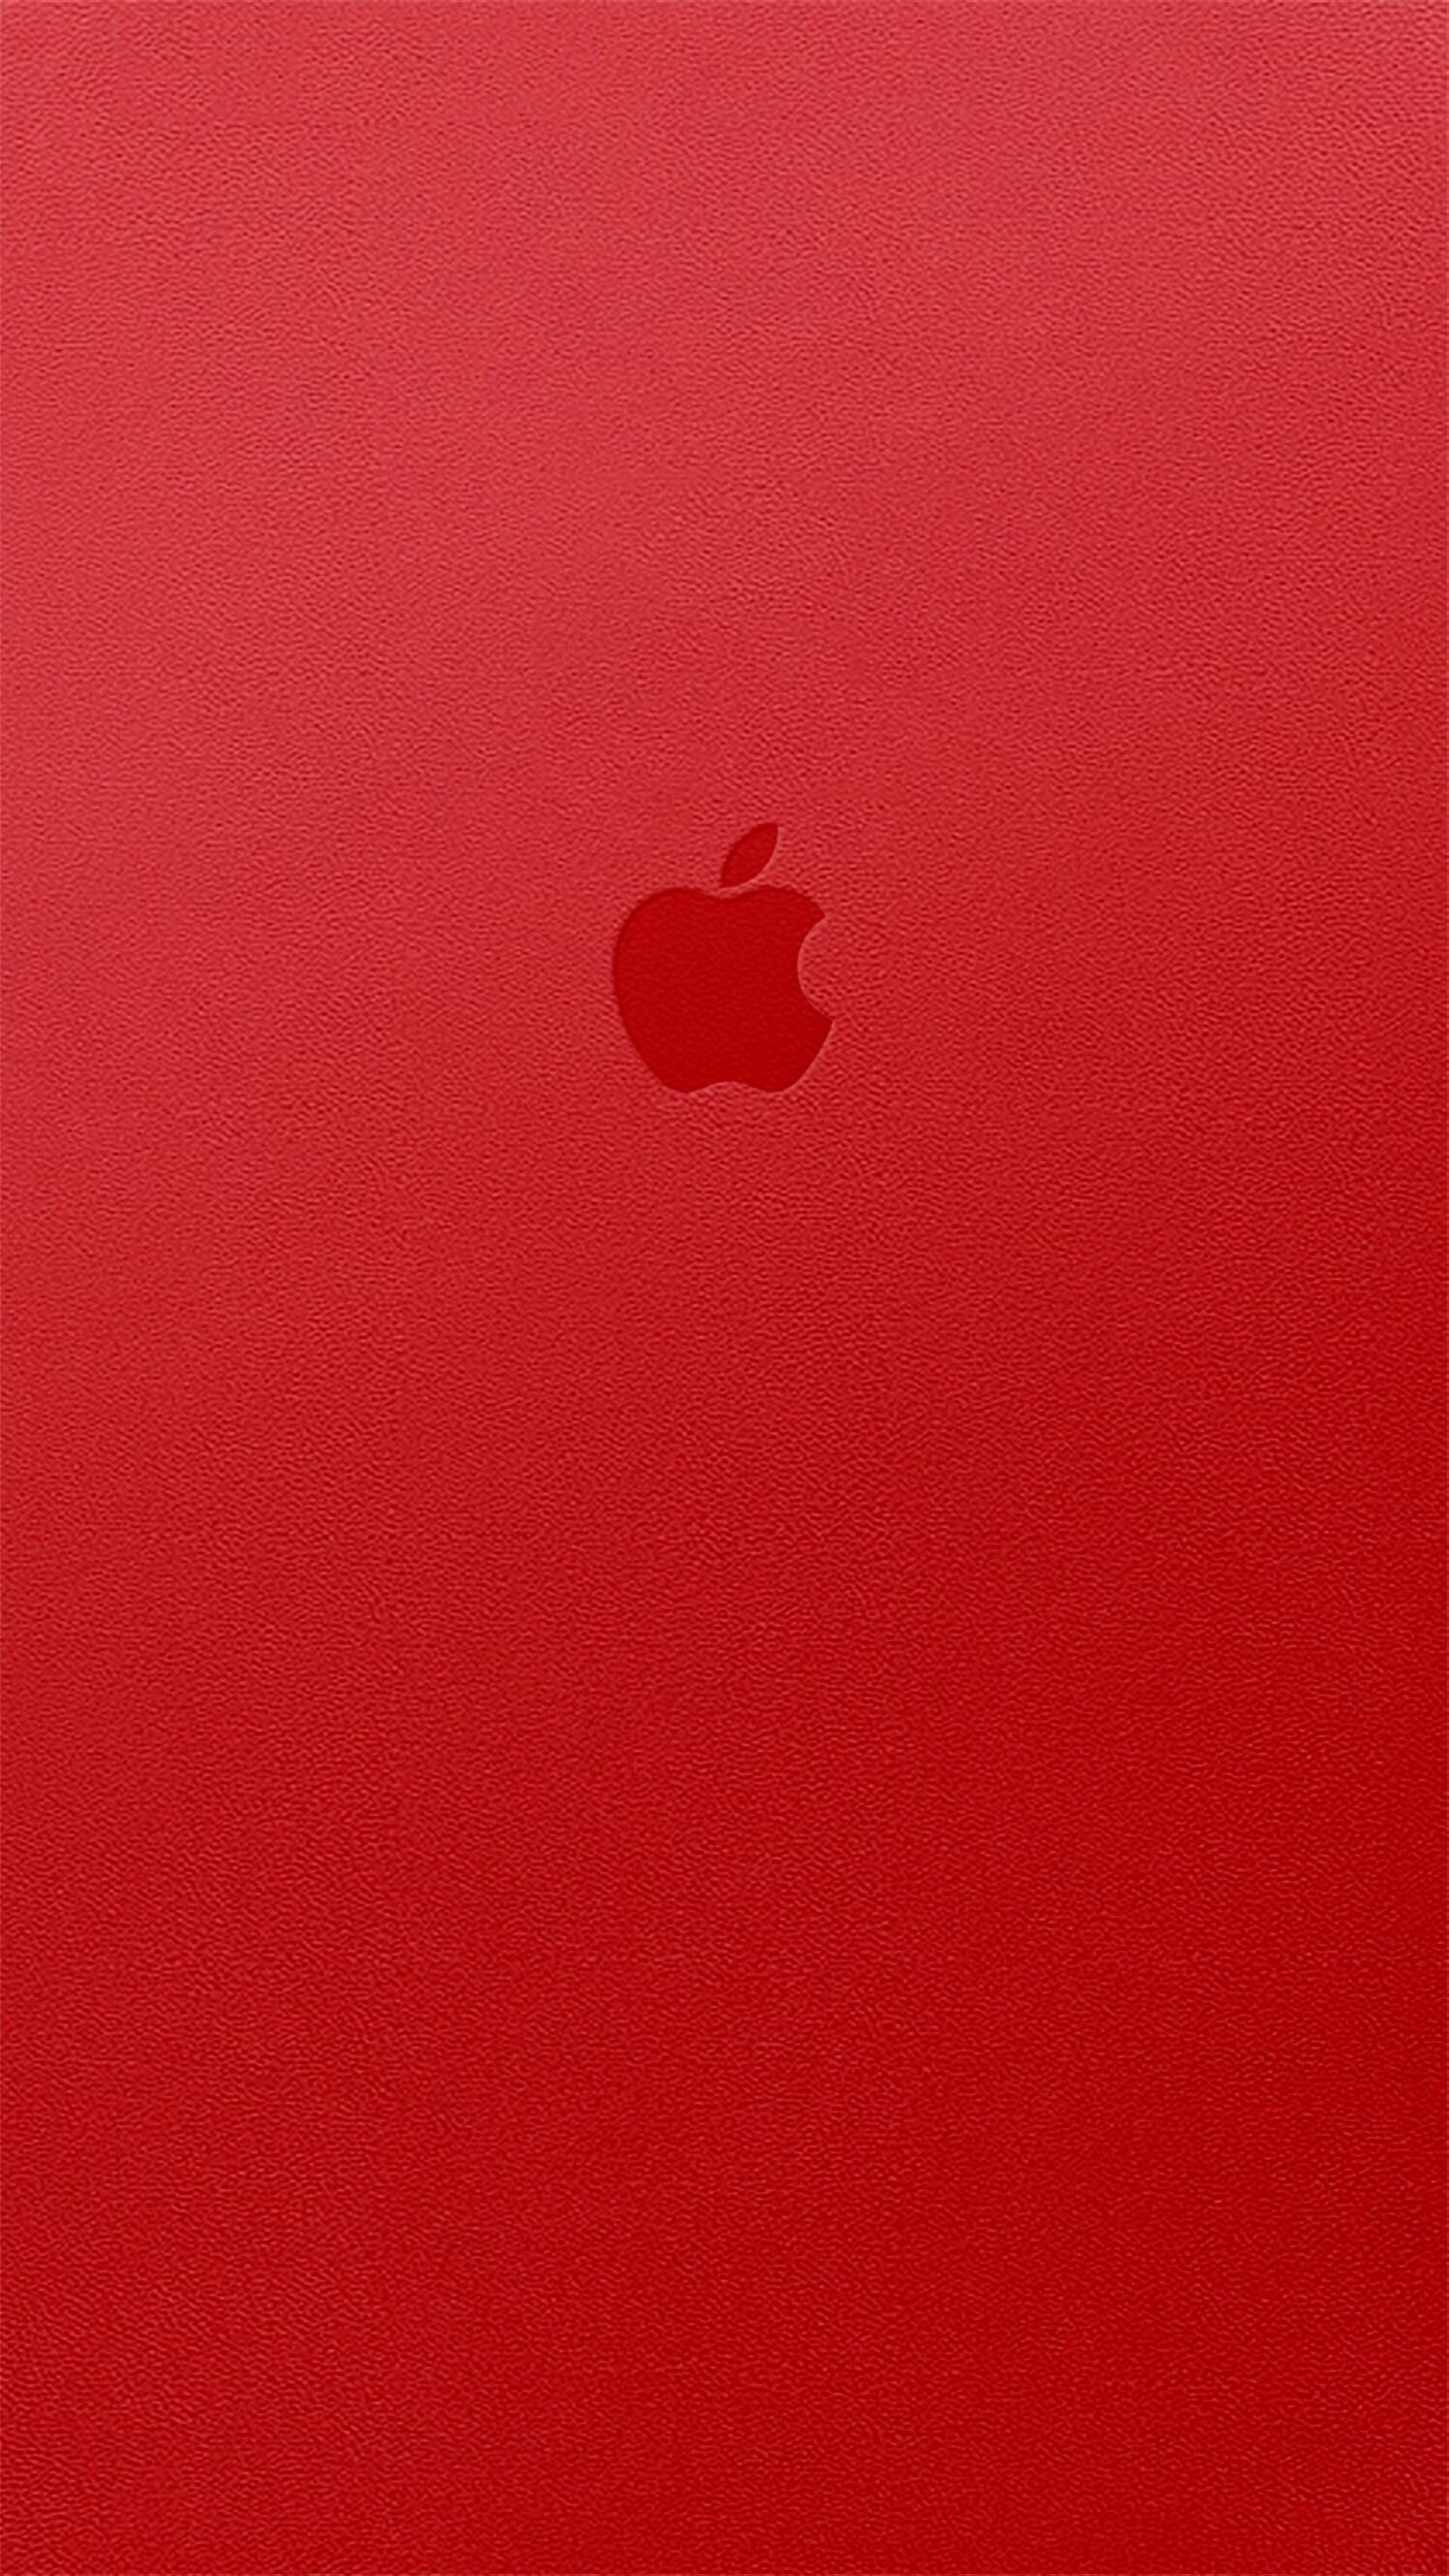 Red iPhone Wallpaper Free Red iPhone Background